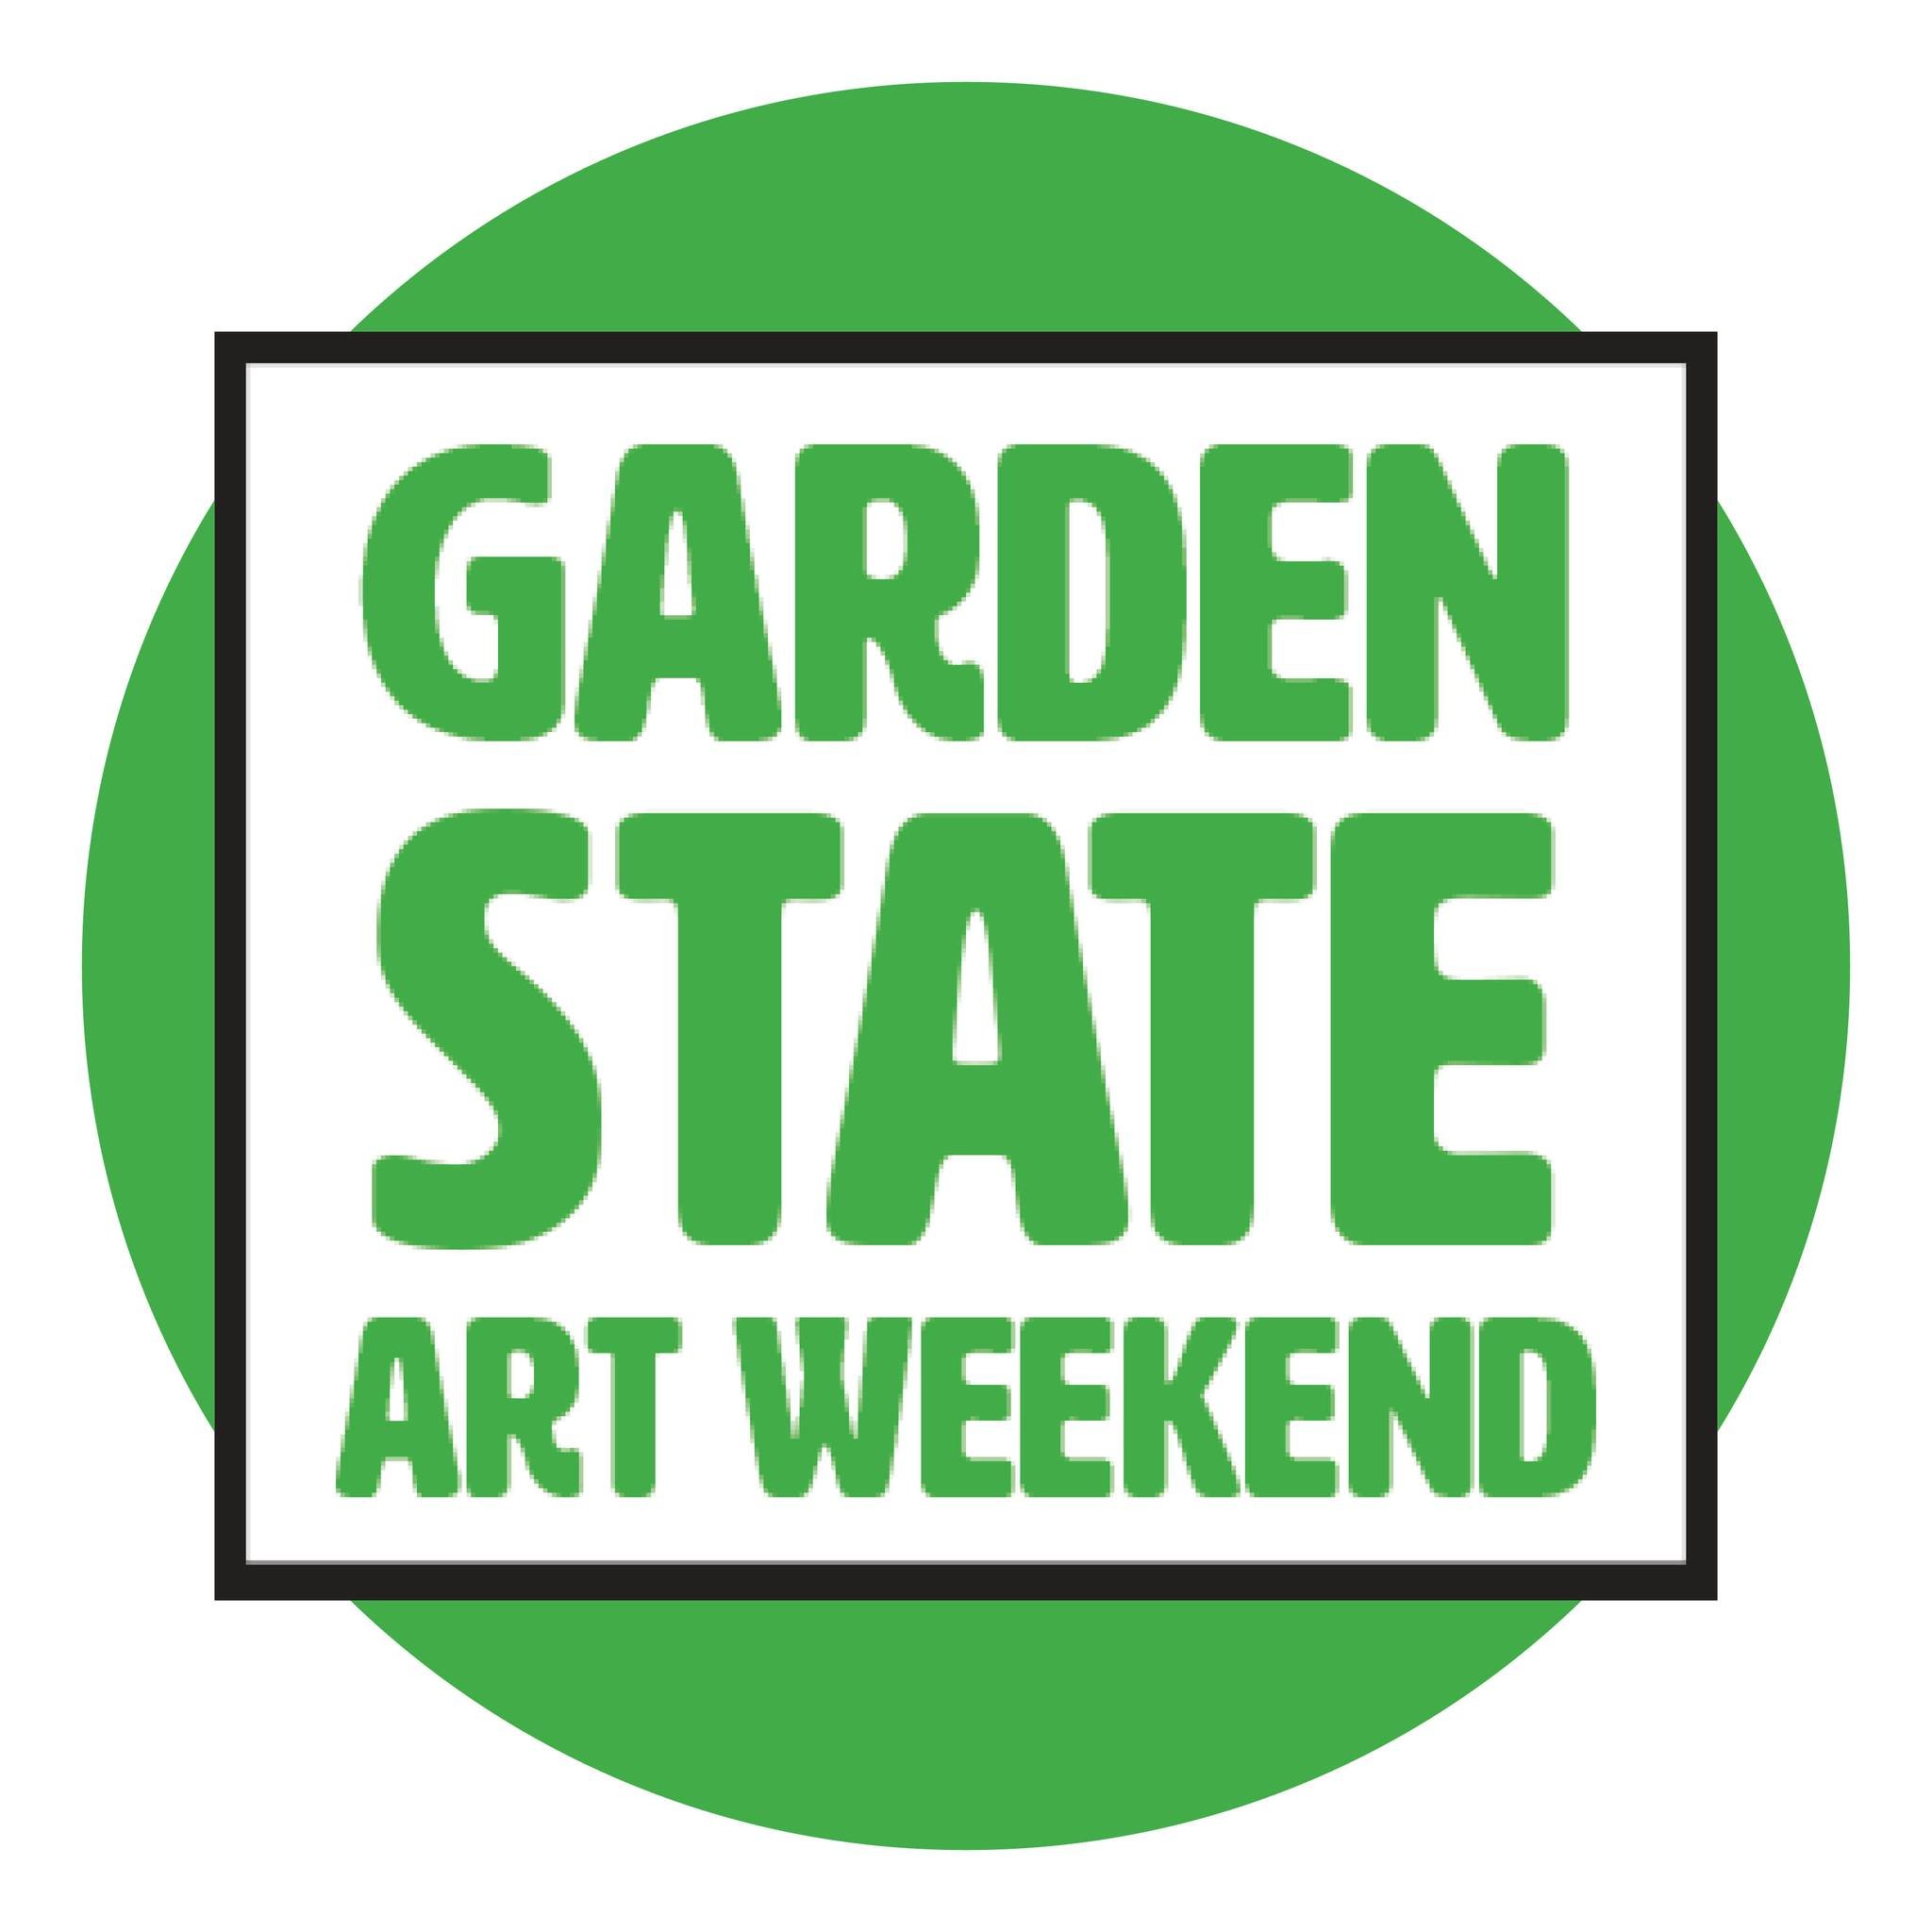 Join us for extended gallery hours for the Garden State Art Weekend! Our current exhibit is the NMHS Junior/Senior show. A full list of contributing galleries can be found at gardenstateartweekend.org

Friday April 19: 6 - 8pm
Saturday April 20: 1 - 